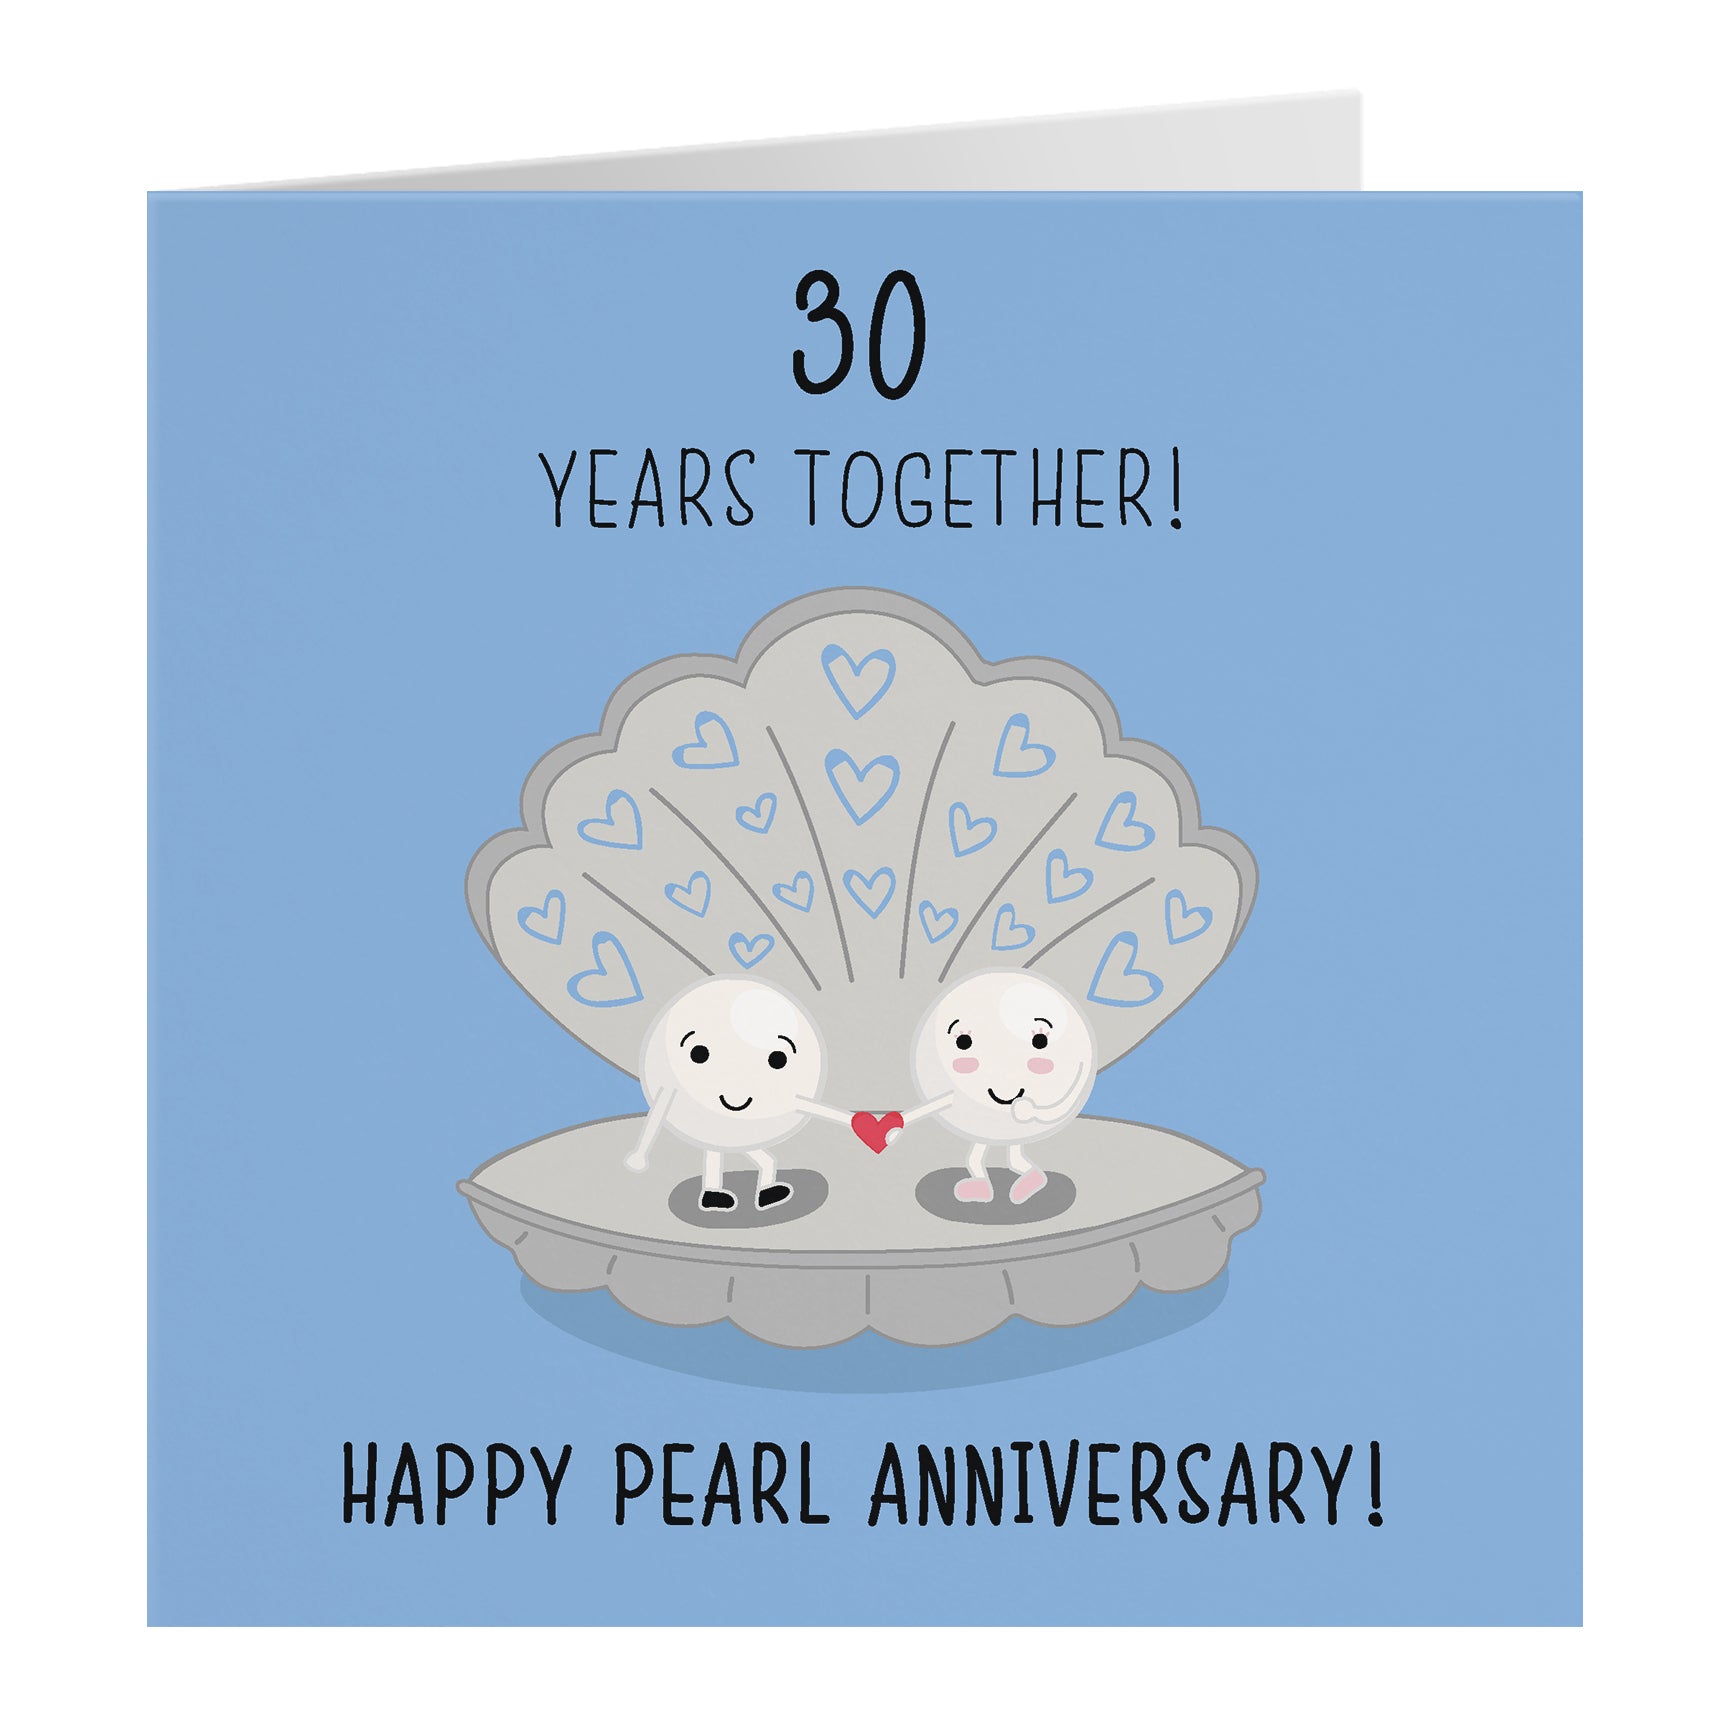 30th Anniversary Cards - Pearl Anniversary